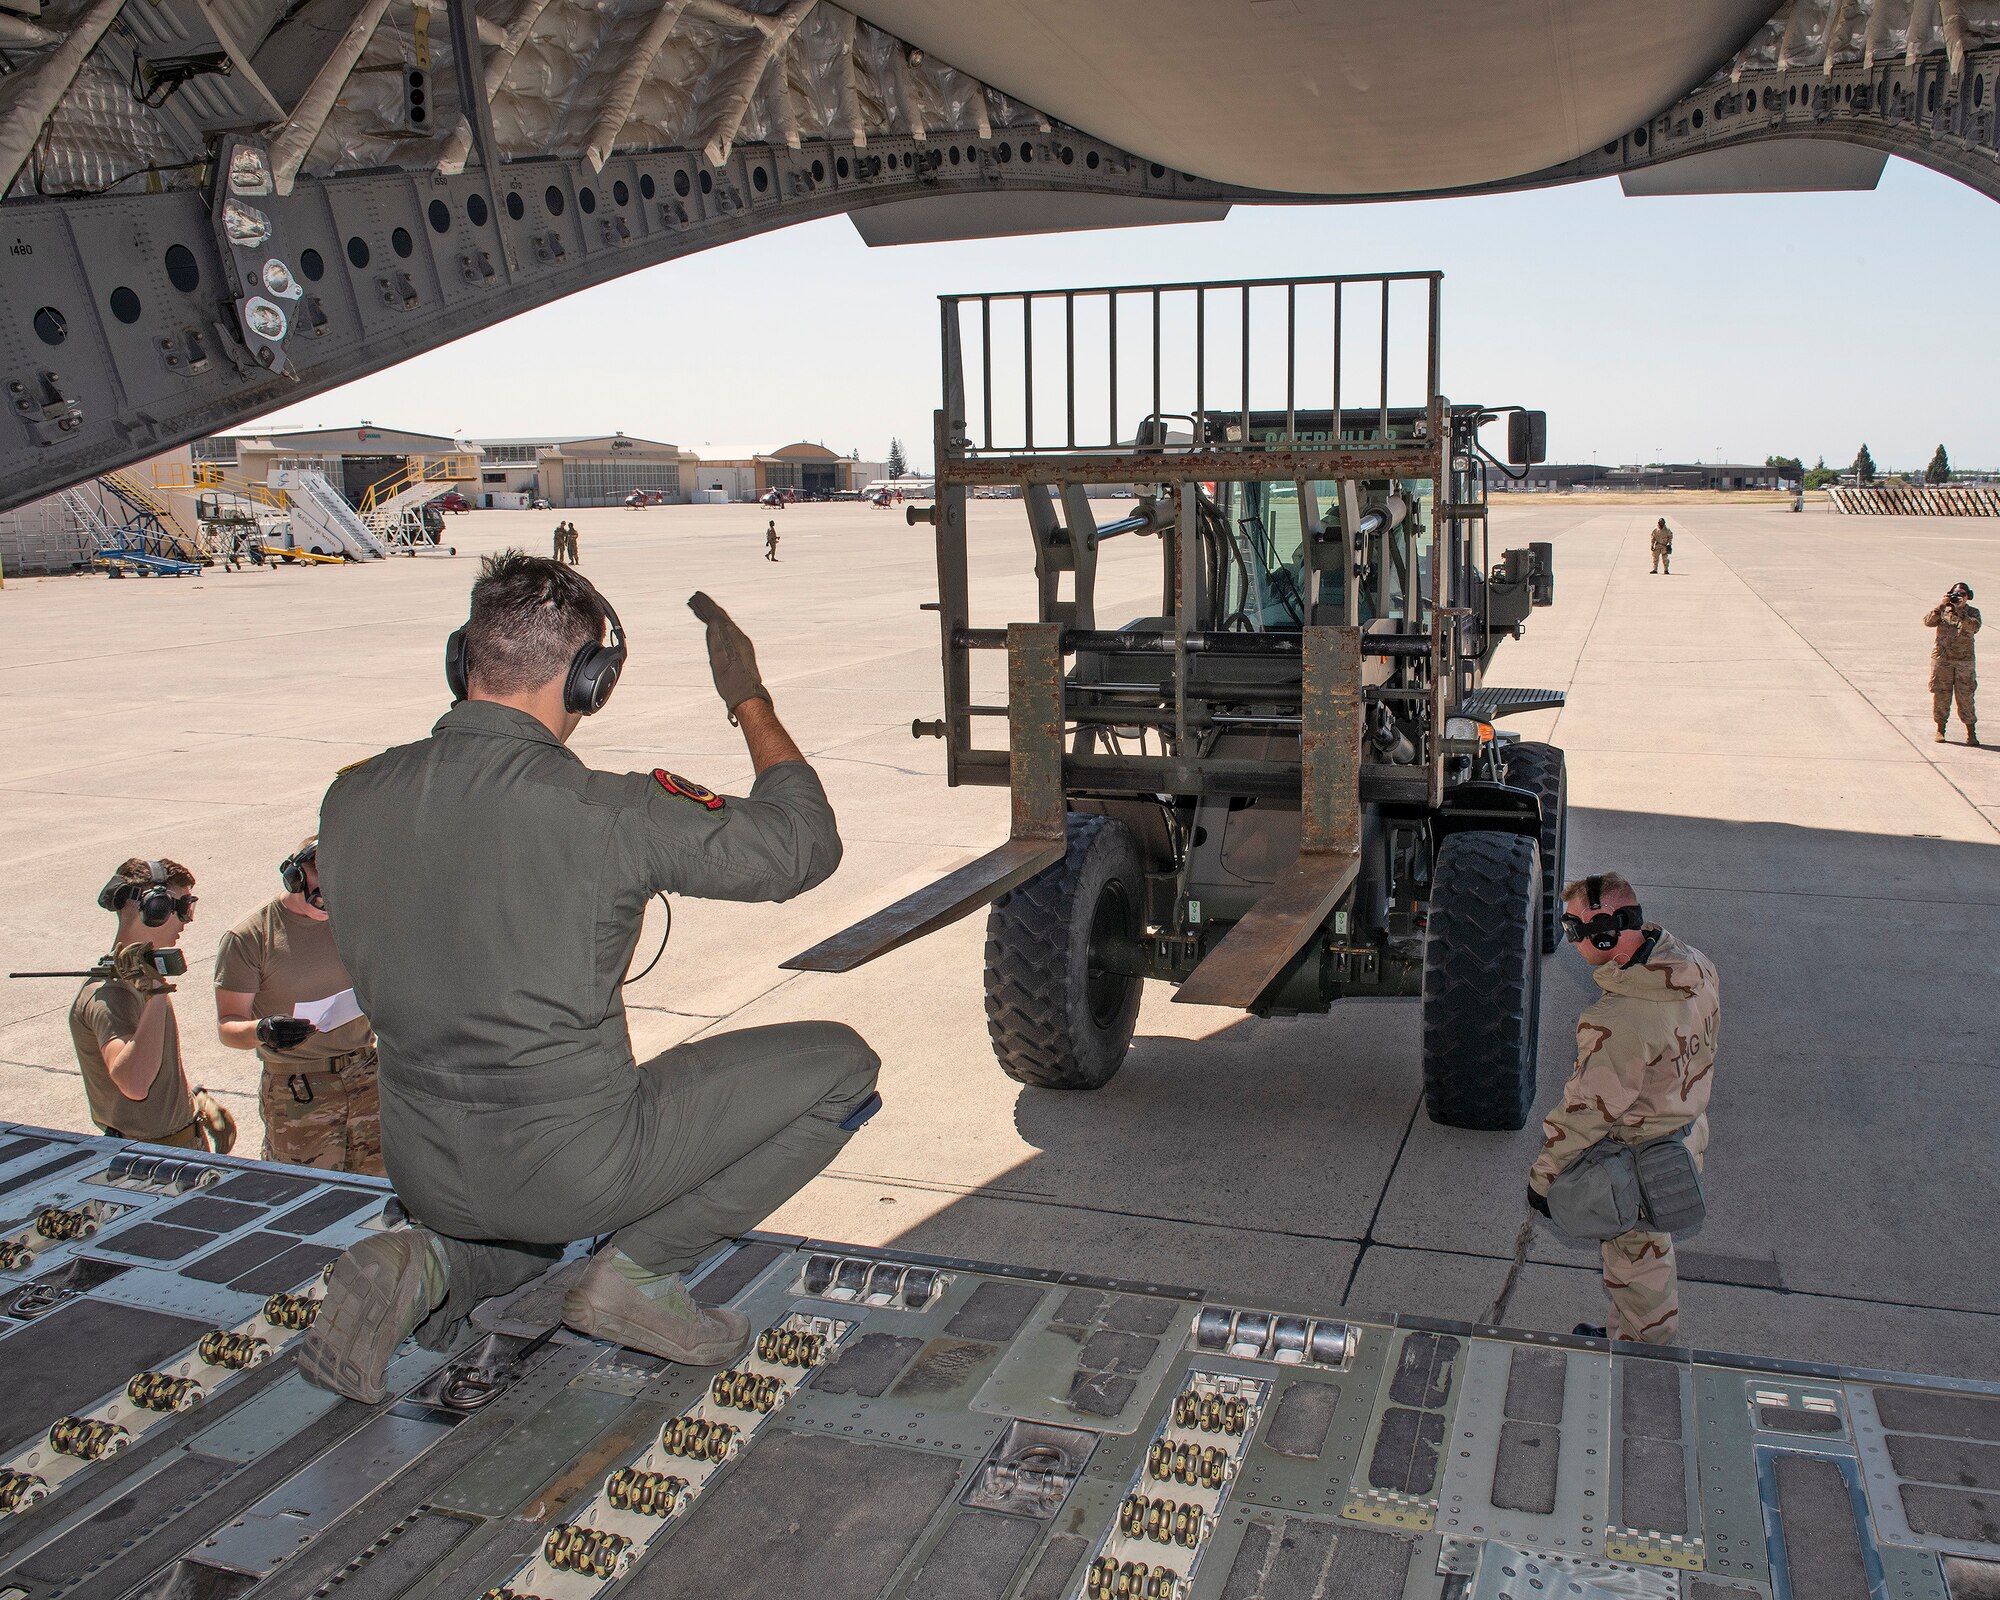 U.S. Air Force Airmen assigned to the 60th Aerial Port Squadron and the 21st Airlift Squadron perform a cargo load during a readiness exercise at Sacramento McClellan Airport, California, May 7, 2019. The base conducted a week-long exercise that evaluated Travis’ readiness and ability to execute and sustain rapid global mobility around the world. (U.S. Air Force photo by Louis Briscese)